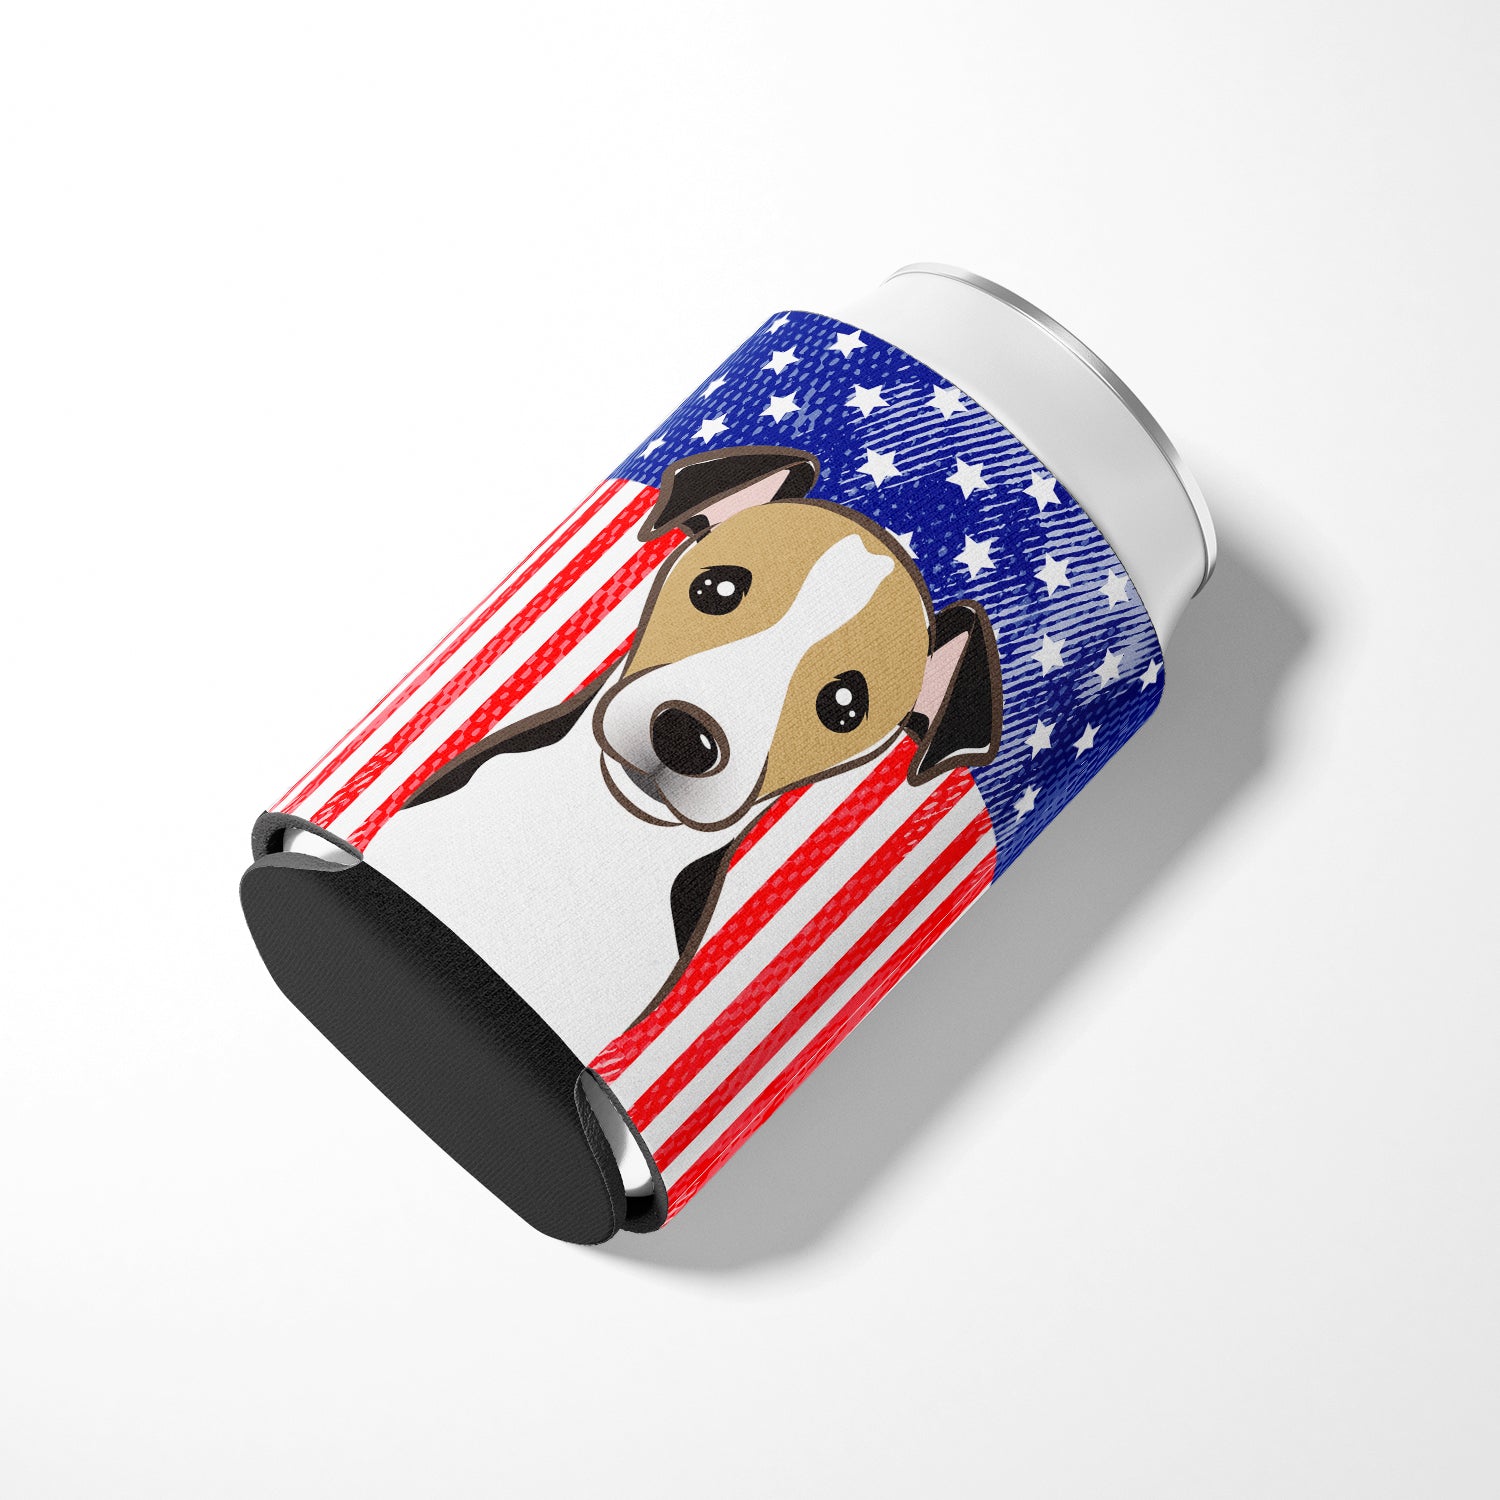 American Flag and Jack Russell Terrier Can or Bottle Hugger BB2191CC.